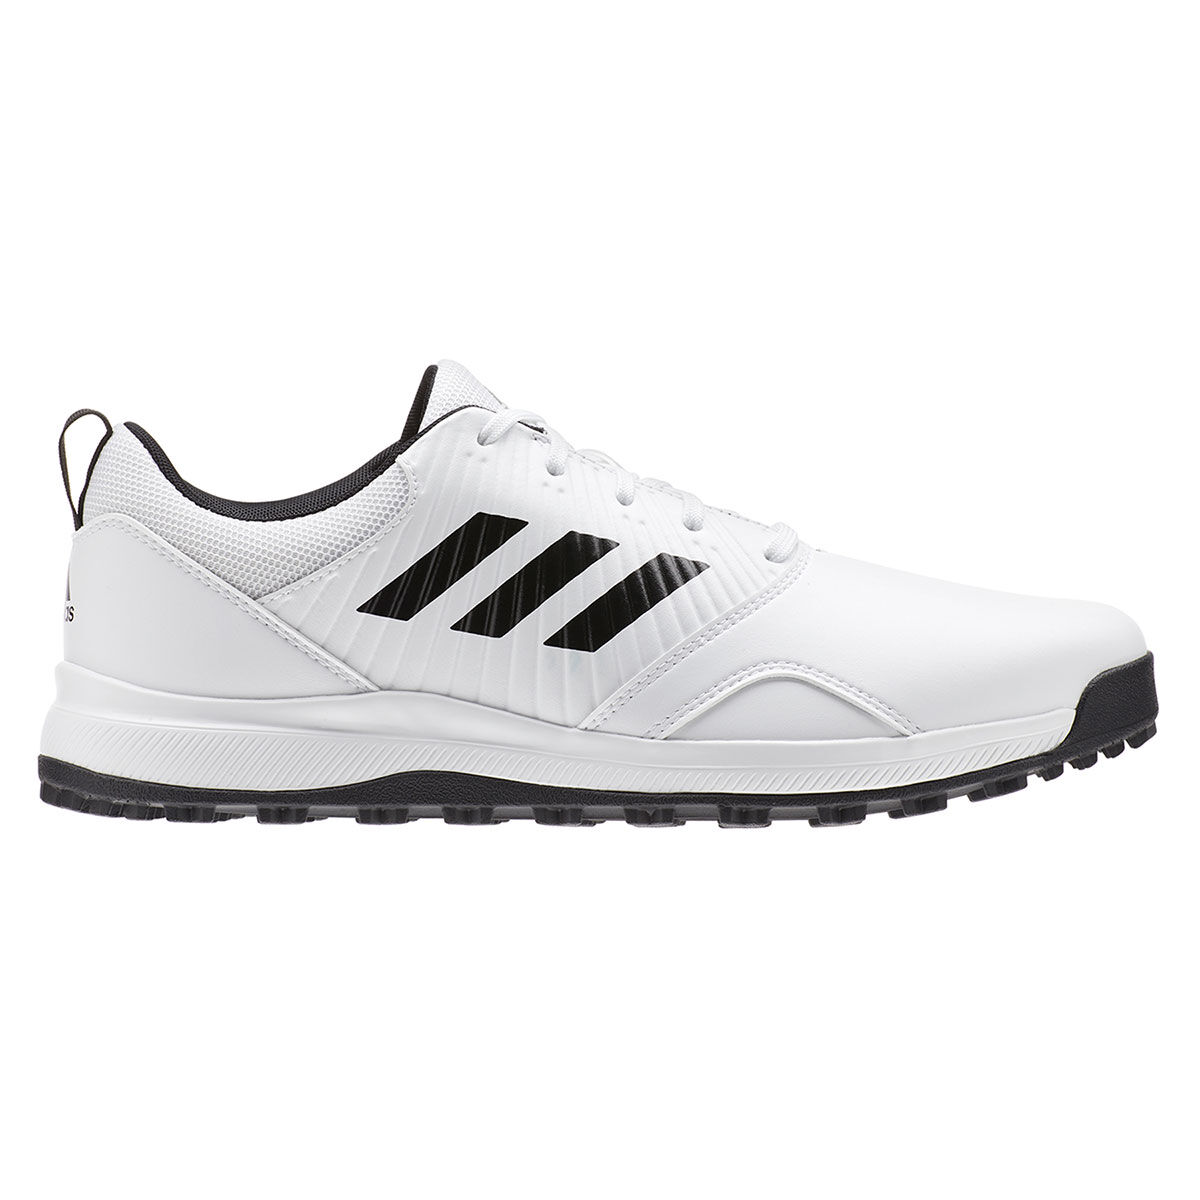 adidas Men's CP Traxion Spikeless Golf Shoes, Mens, White/core black/grey six, 7, Wide | American Golf von adidas Golf